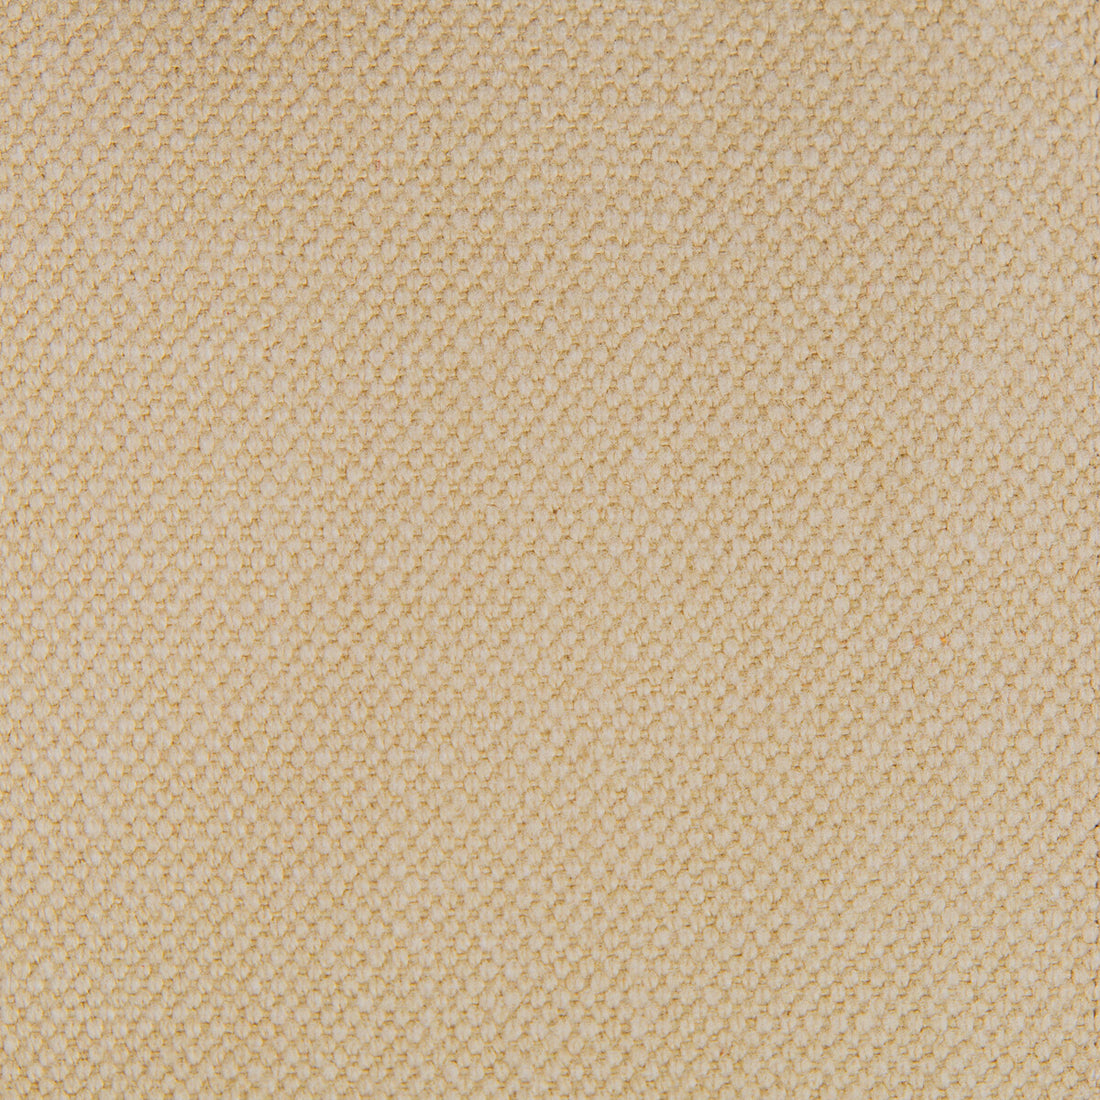 Lima fabric in beige color - pattern GDT5616.003.0 - by Gaston y Daniela in the Gaston Nuevo Mundo collection